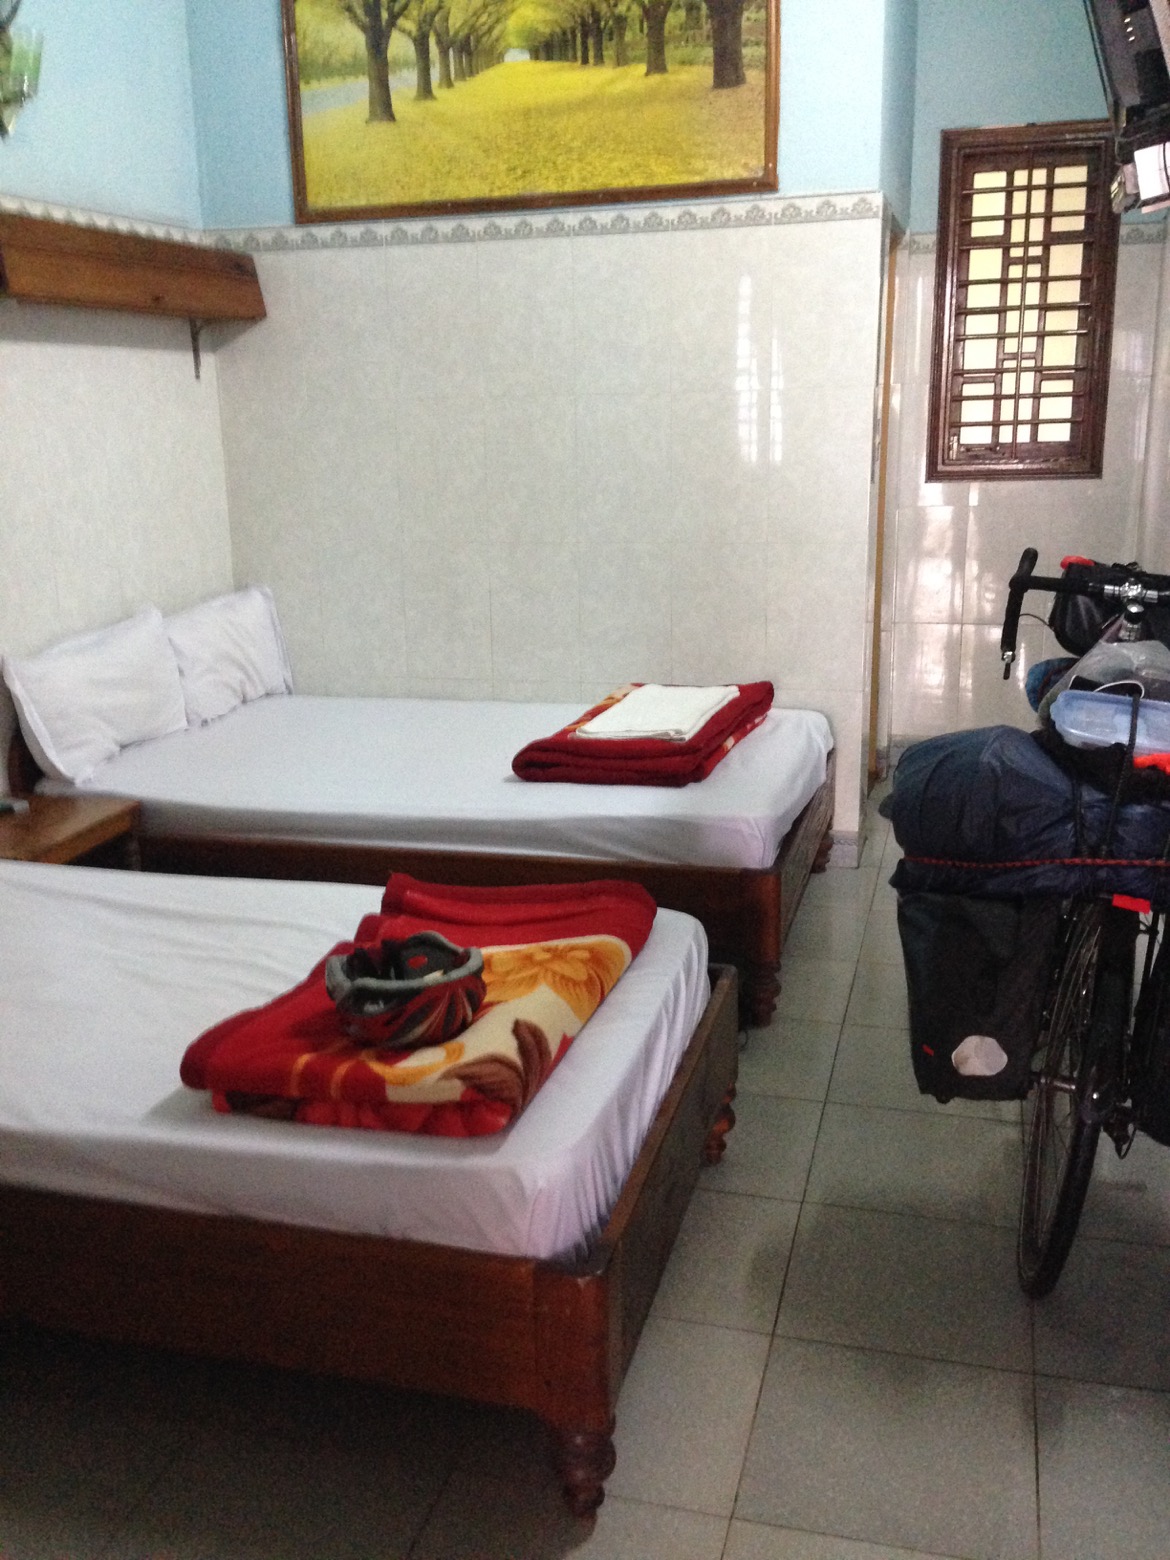  I was relieved to finally reach A Luoi and find a guesthouse. What an incredibly difficult and challenging day of cycling.  